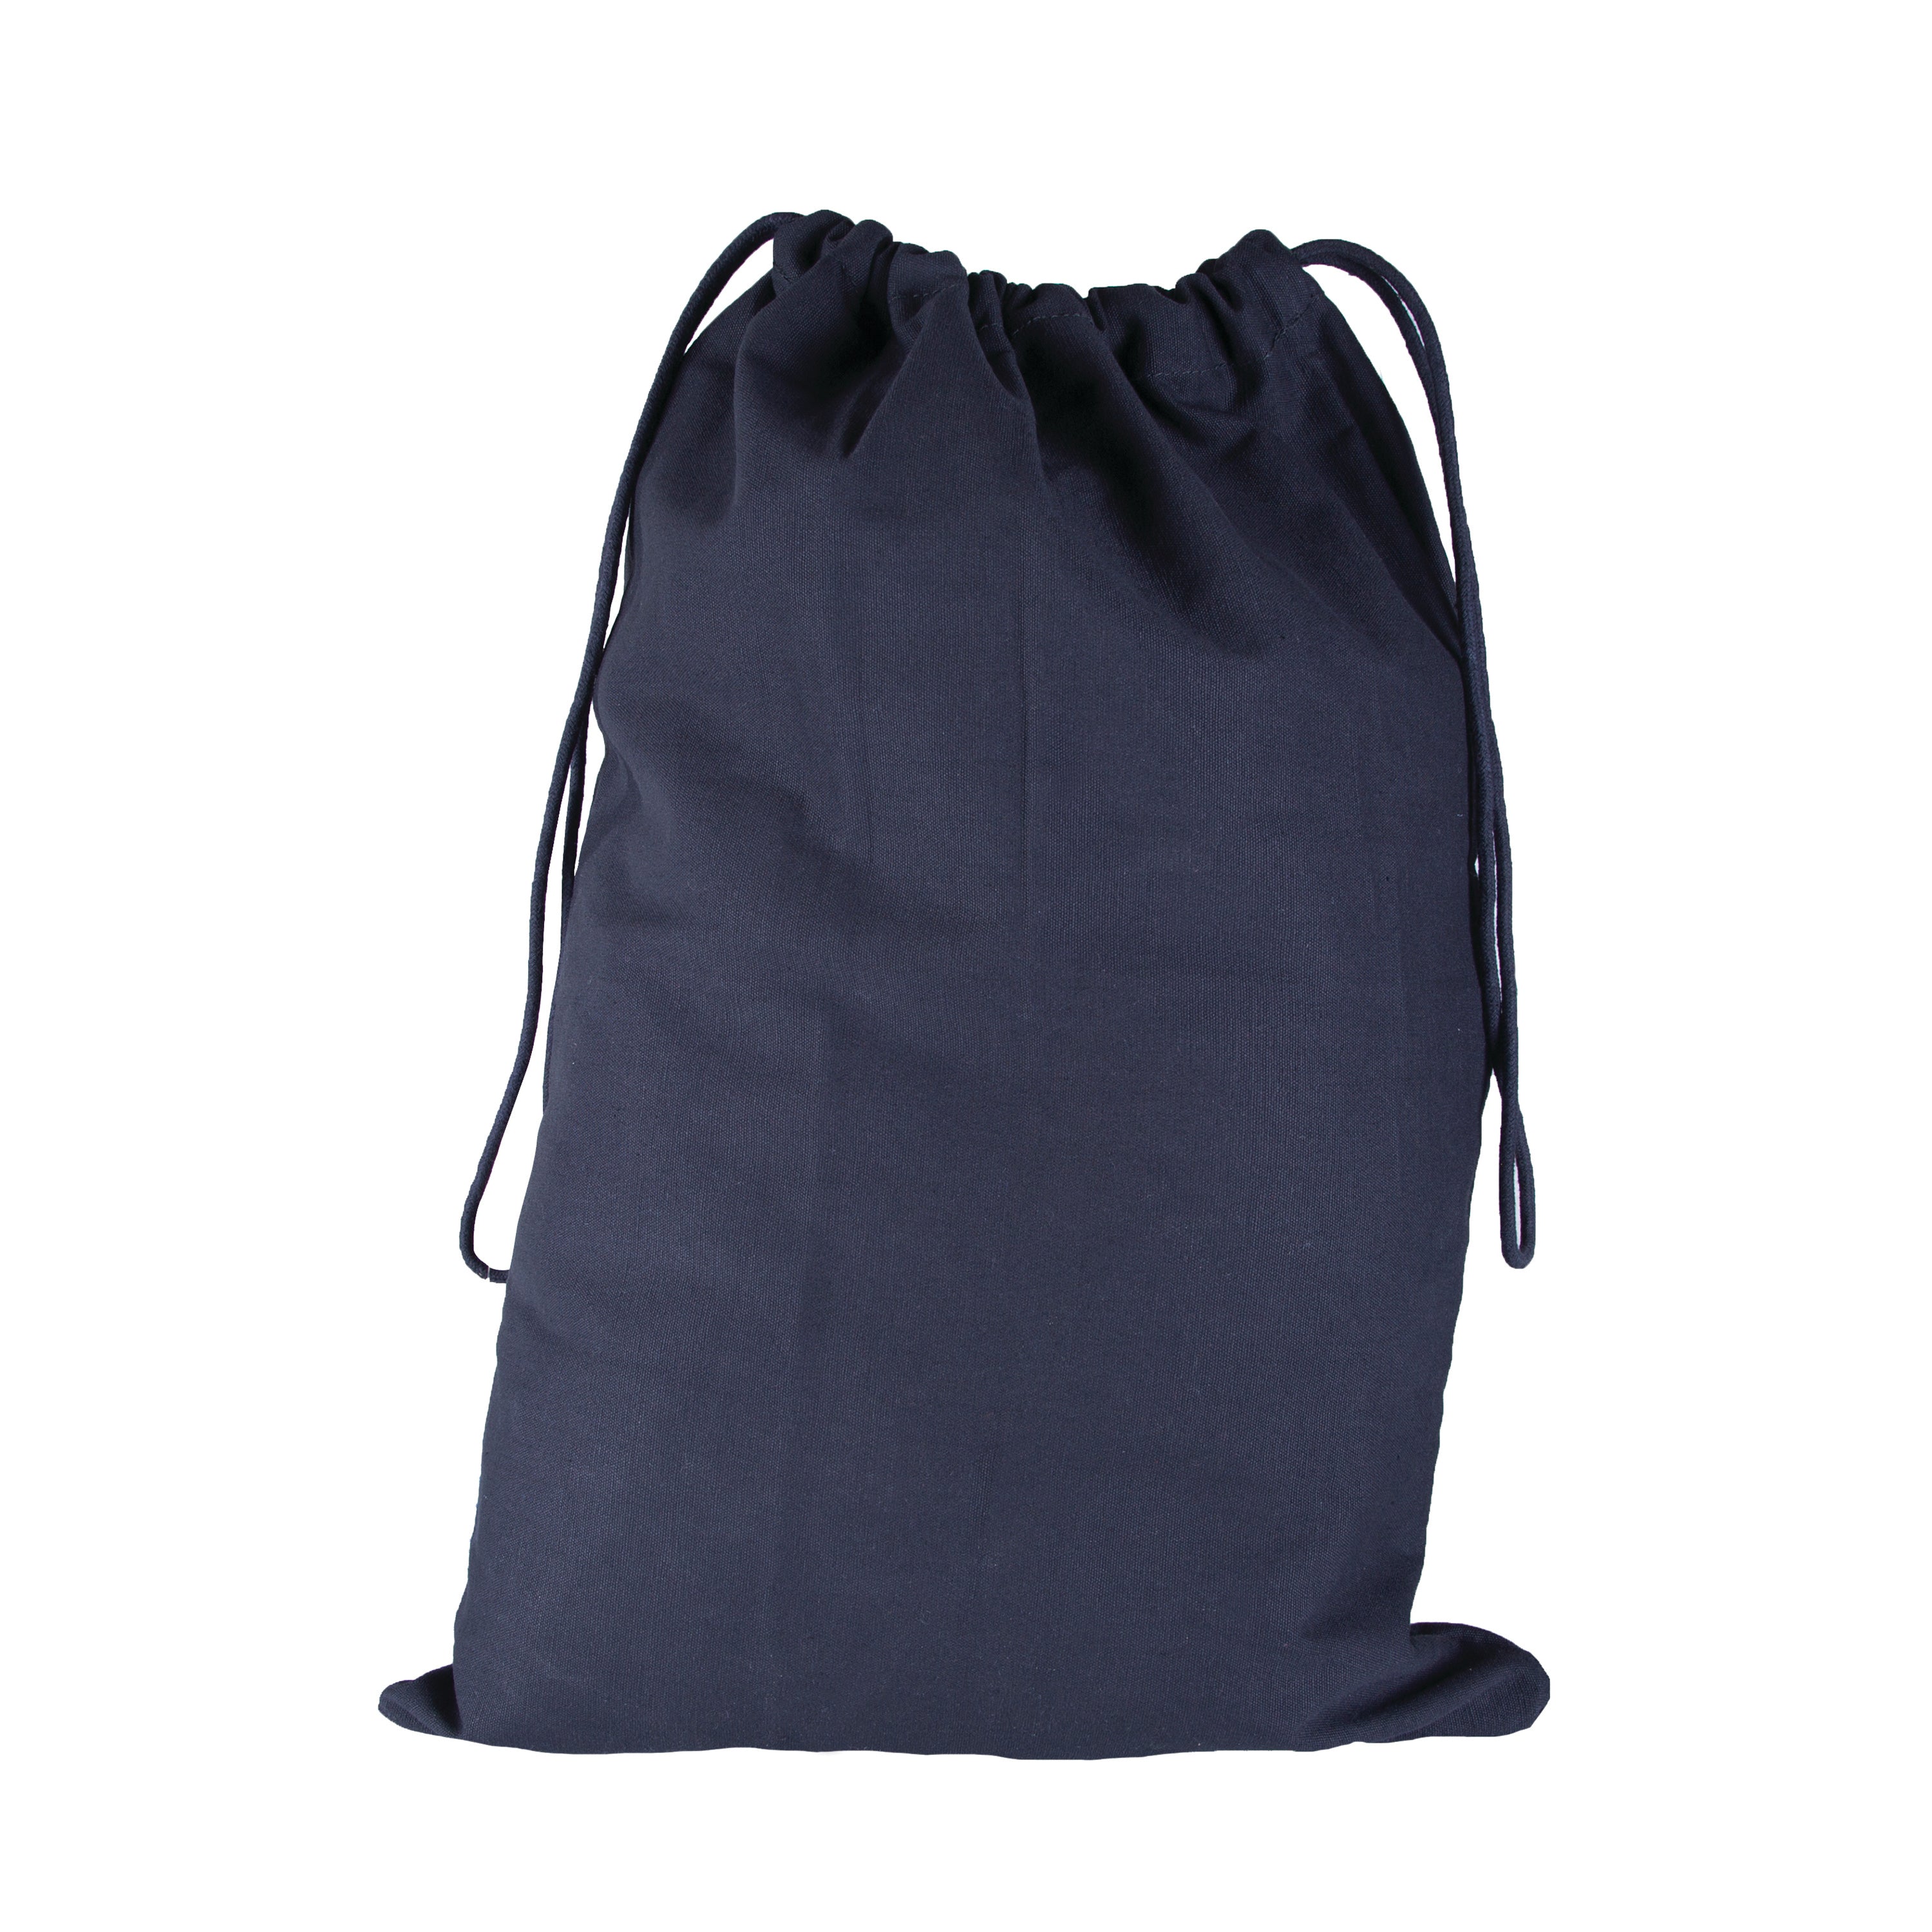 Canvas Laundry Bag - Black - 18 In X 27 In-eSafety Supplies, Inc